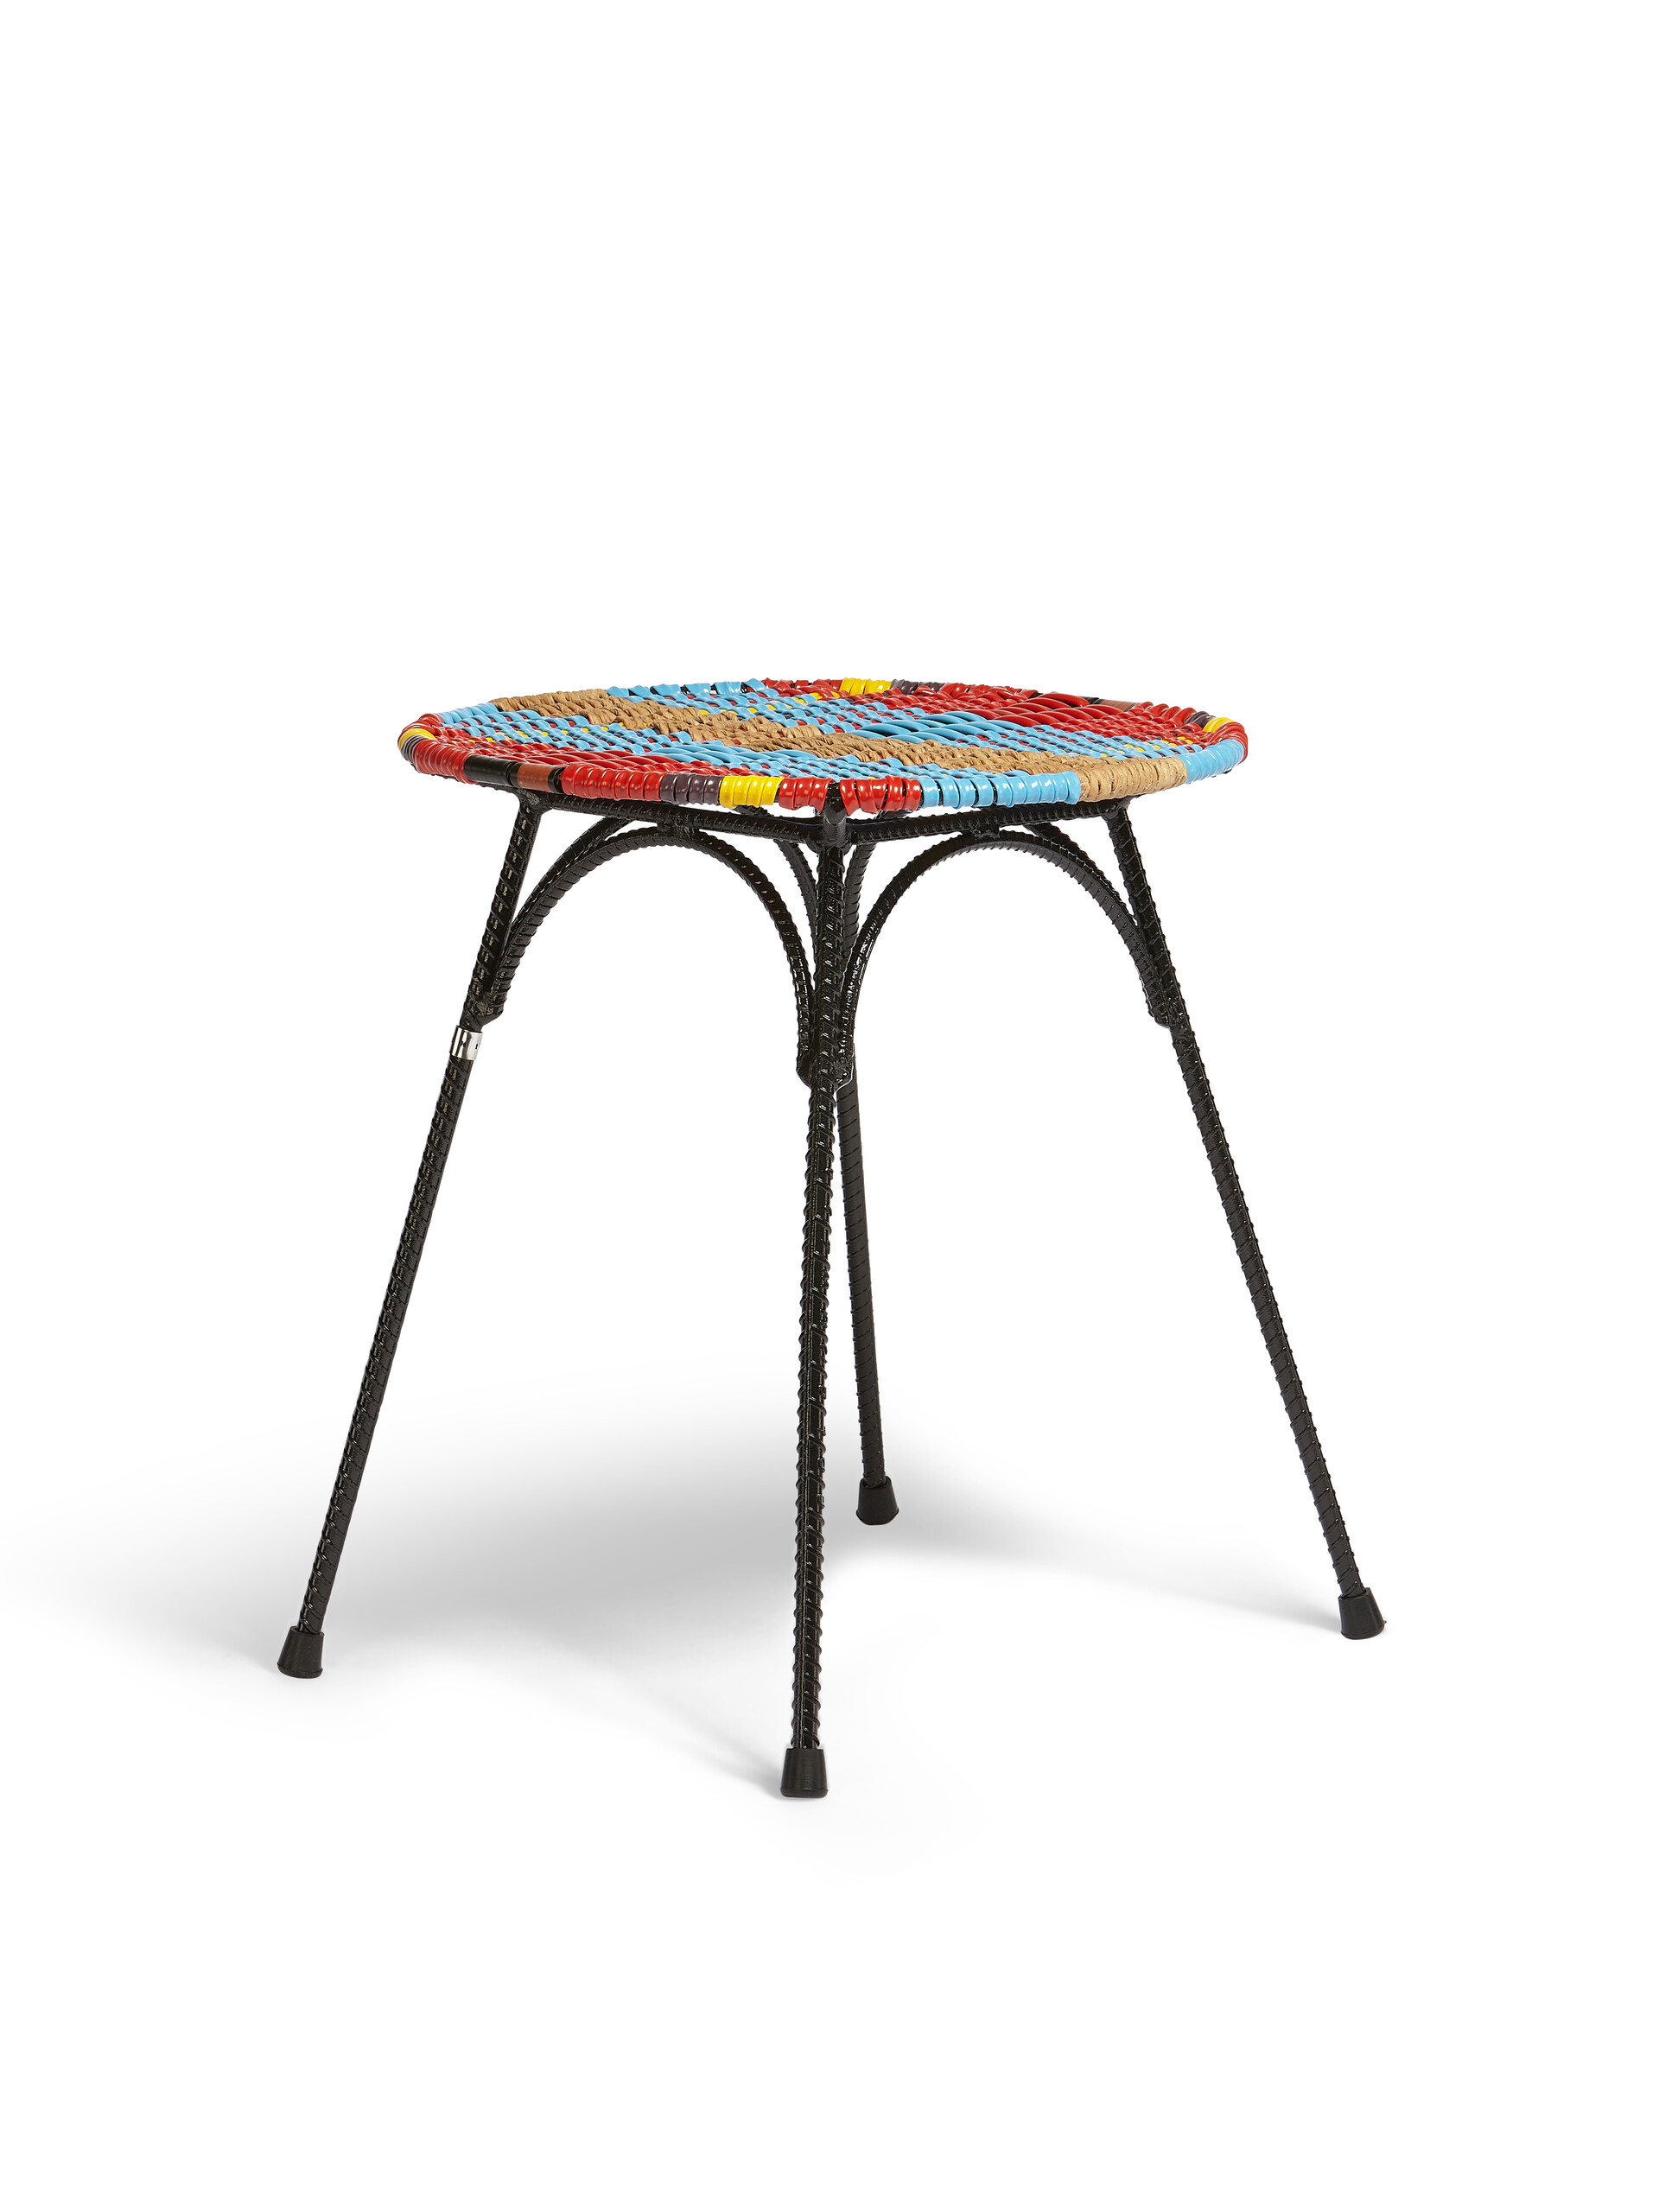 MARNI MARKET stool-table in iron sky blue red PVC - Furniture - Image 2